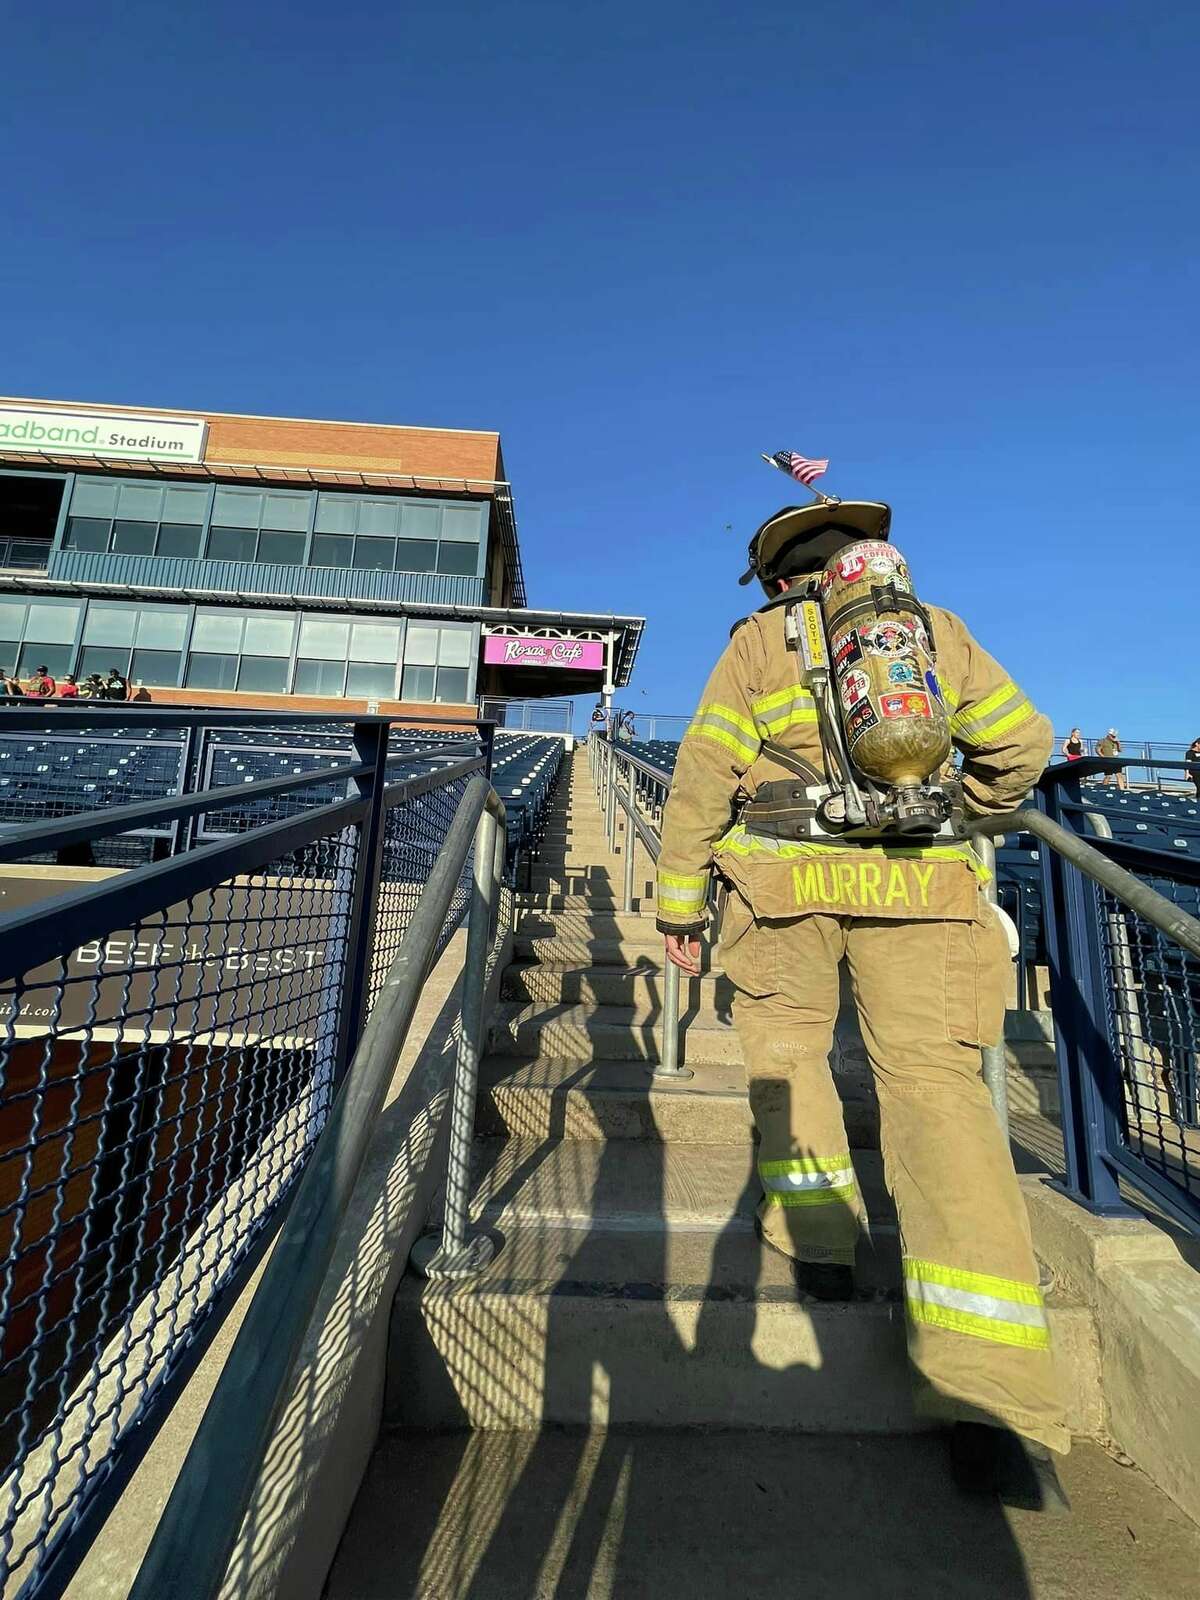 The Tall City Memorial Stair Climb took place this past weekend to honor victims of 9/11. 